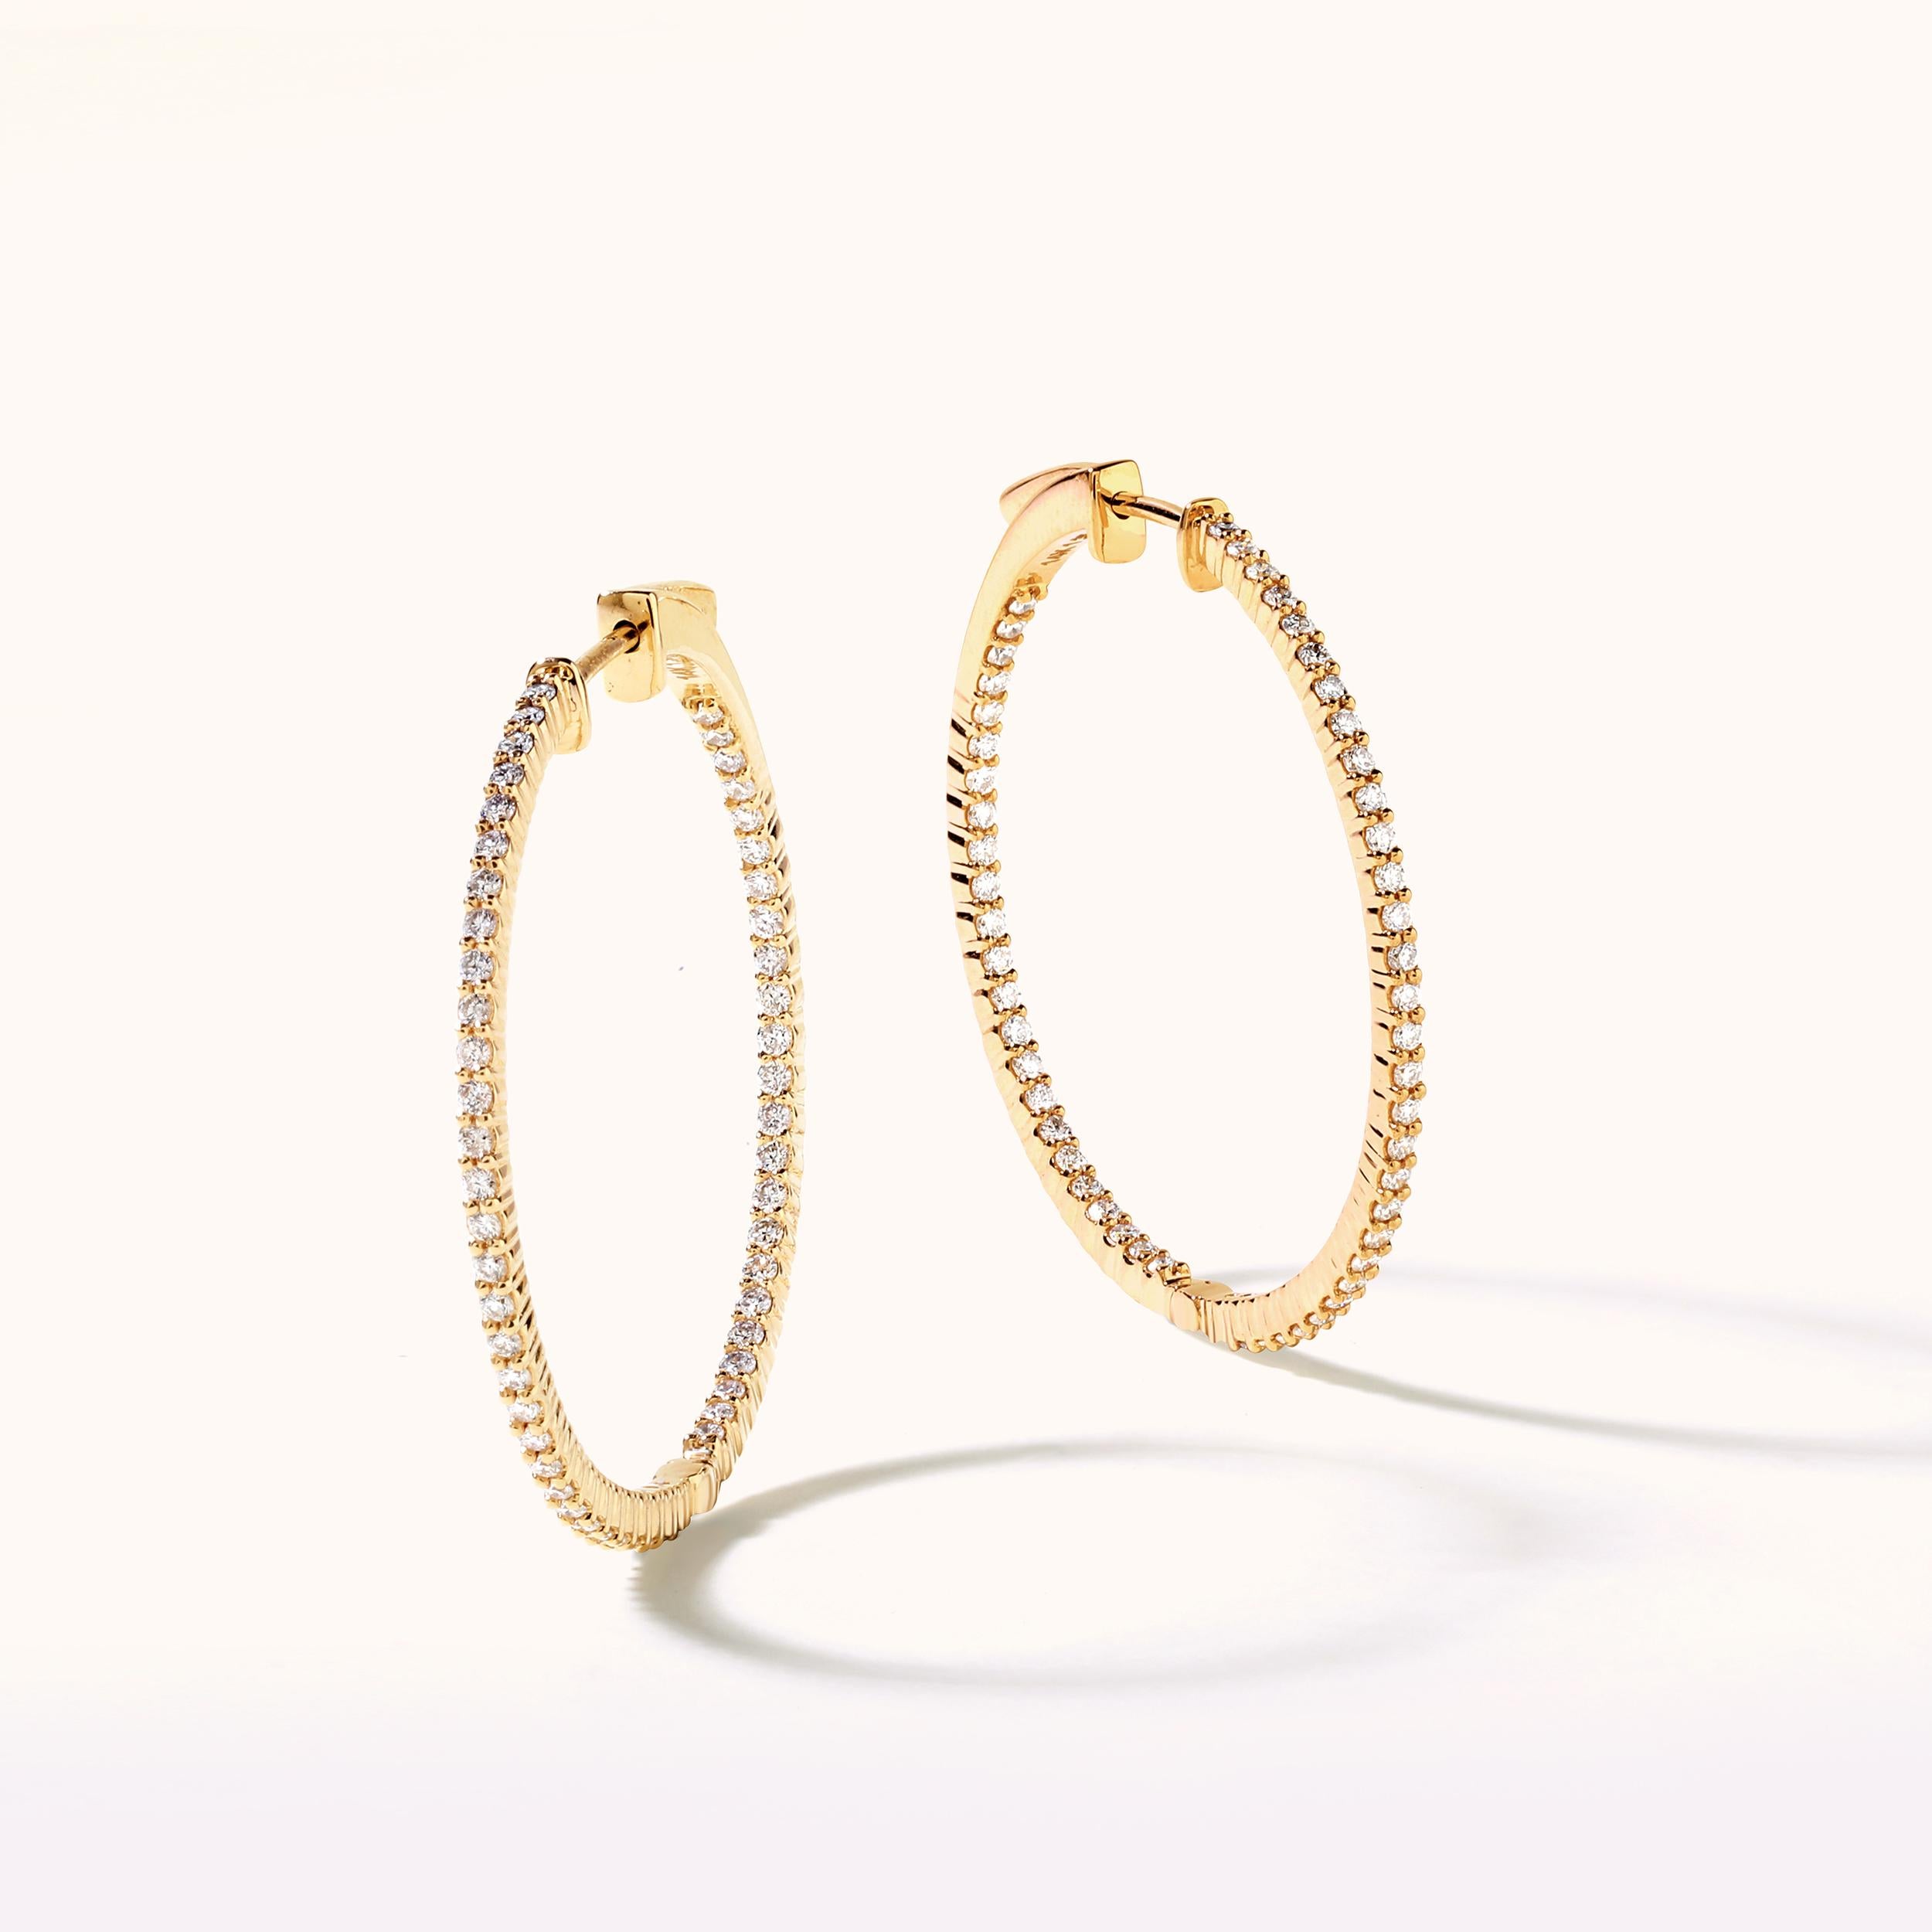 Crafted in 8.5 grams of 14K Yellow Gold, the earrings contains 108 stones of Round Diamonds with a total of 1.35 carat in G-H color and SI clarity.
This jewelry piece will be expertly crafted by our skilled artisans upon order. Allow us a shipping